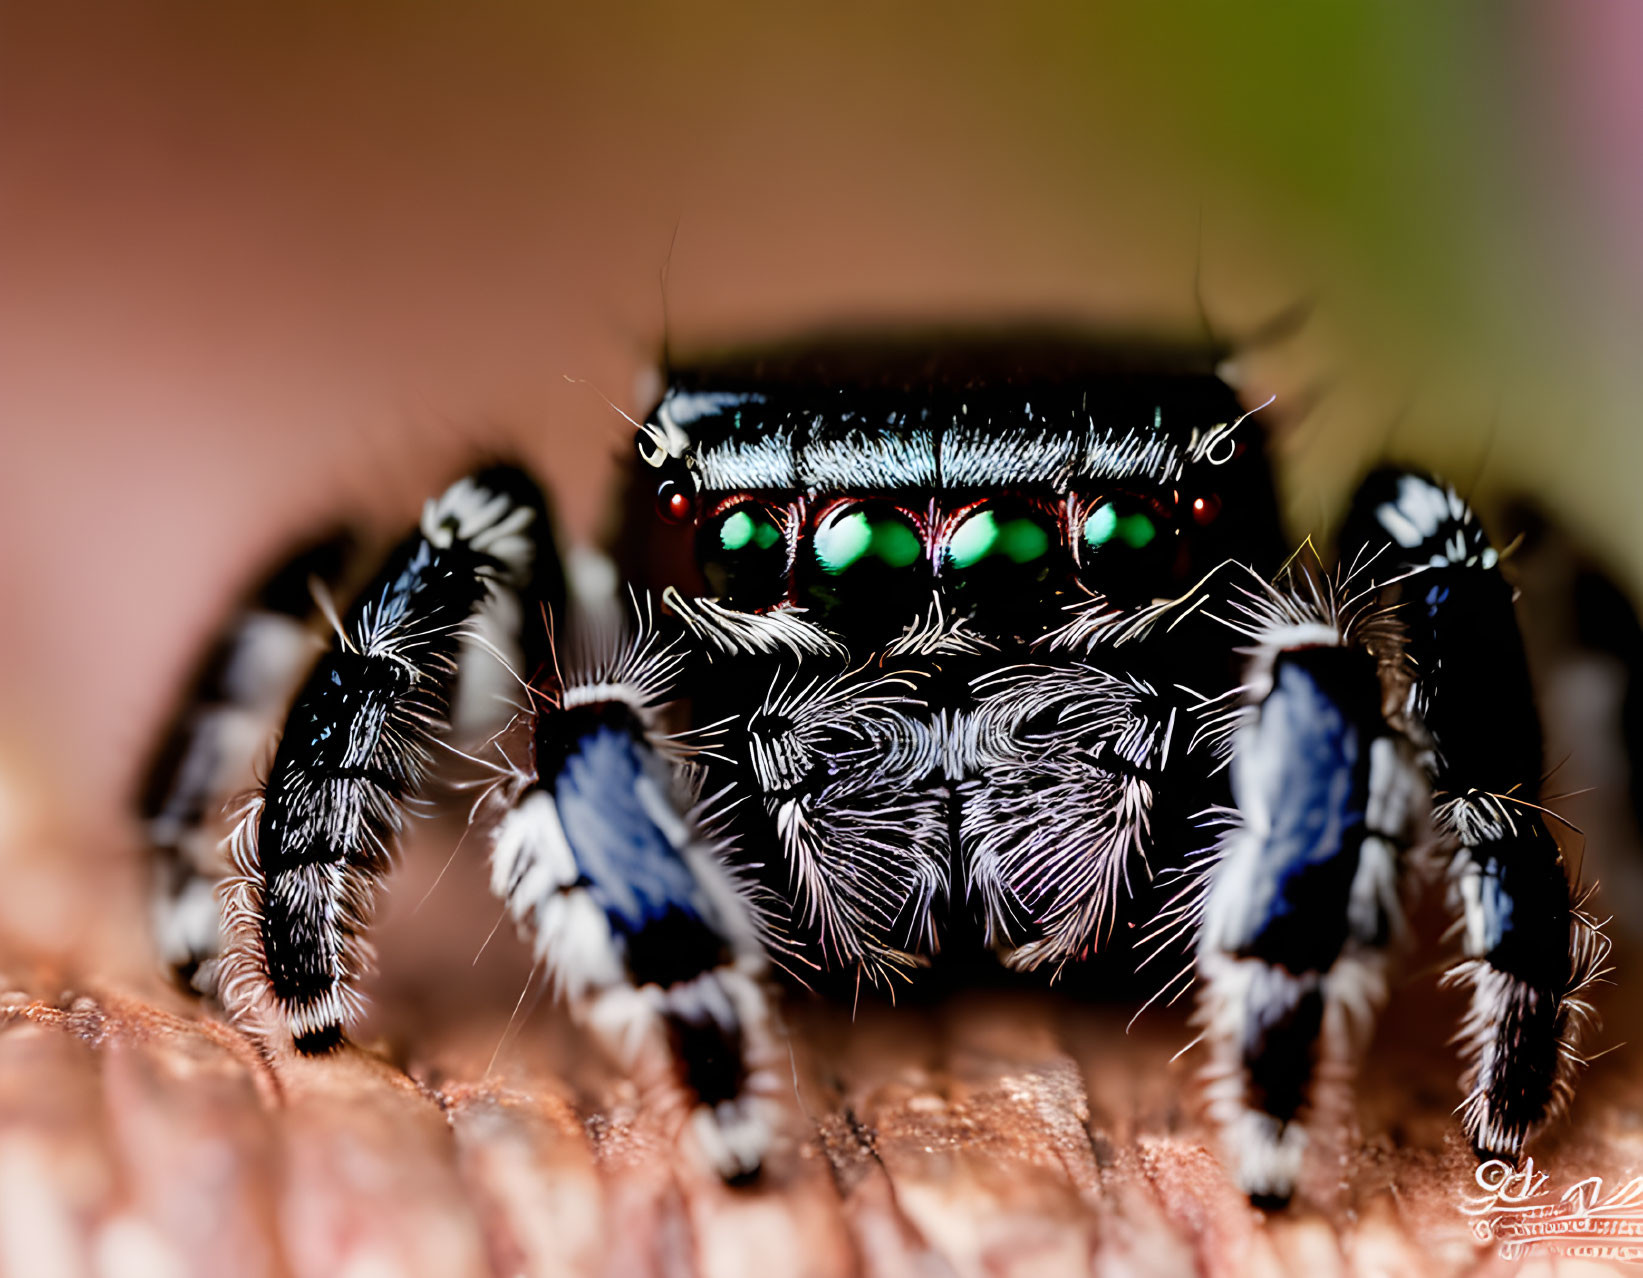 Jumping spider with green eyes and banded legs on blurred background